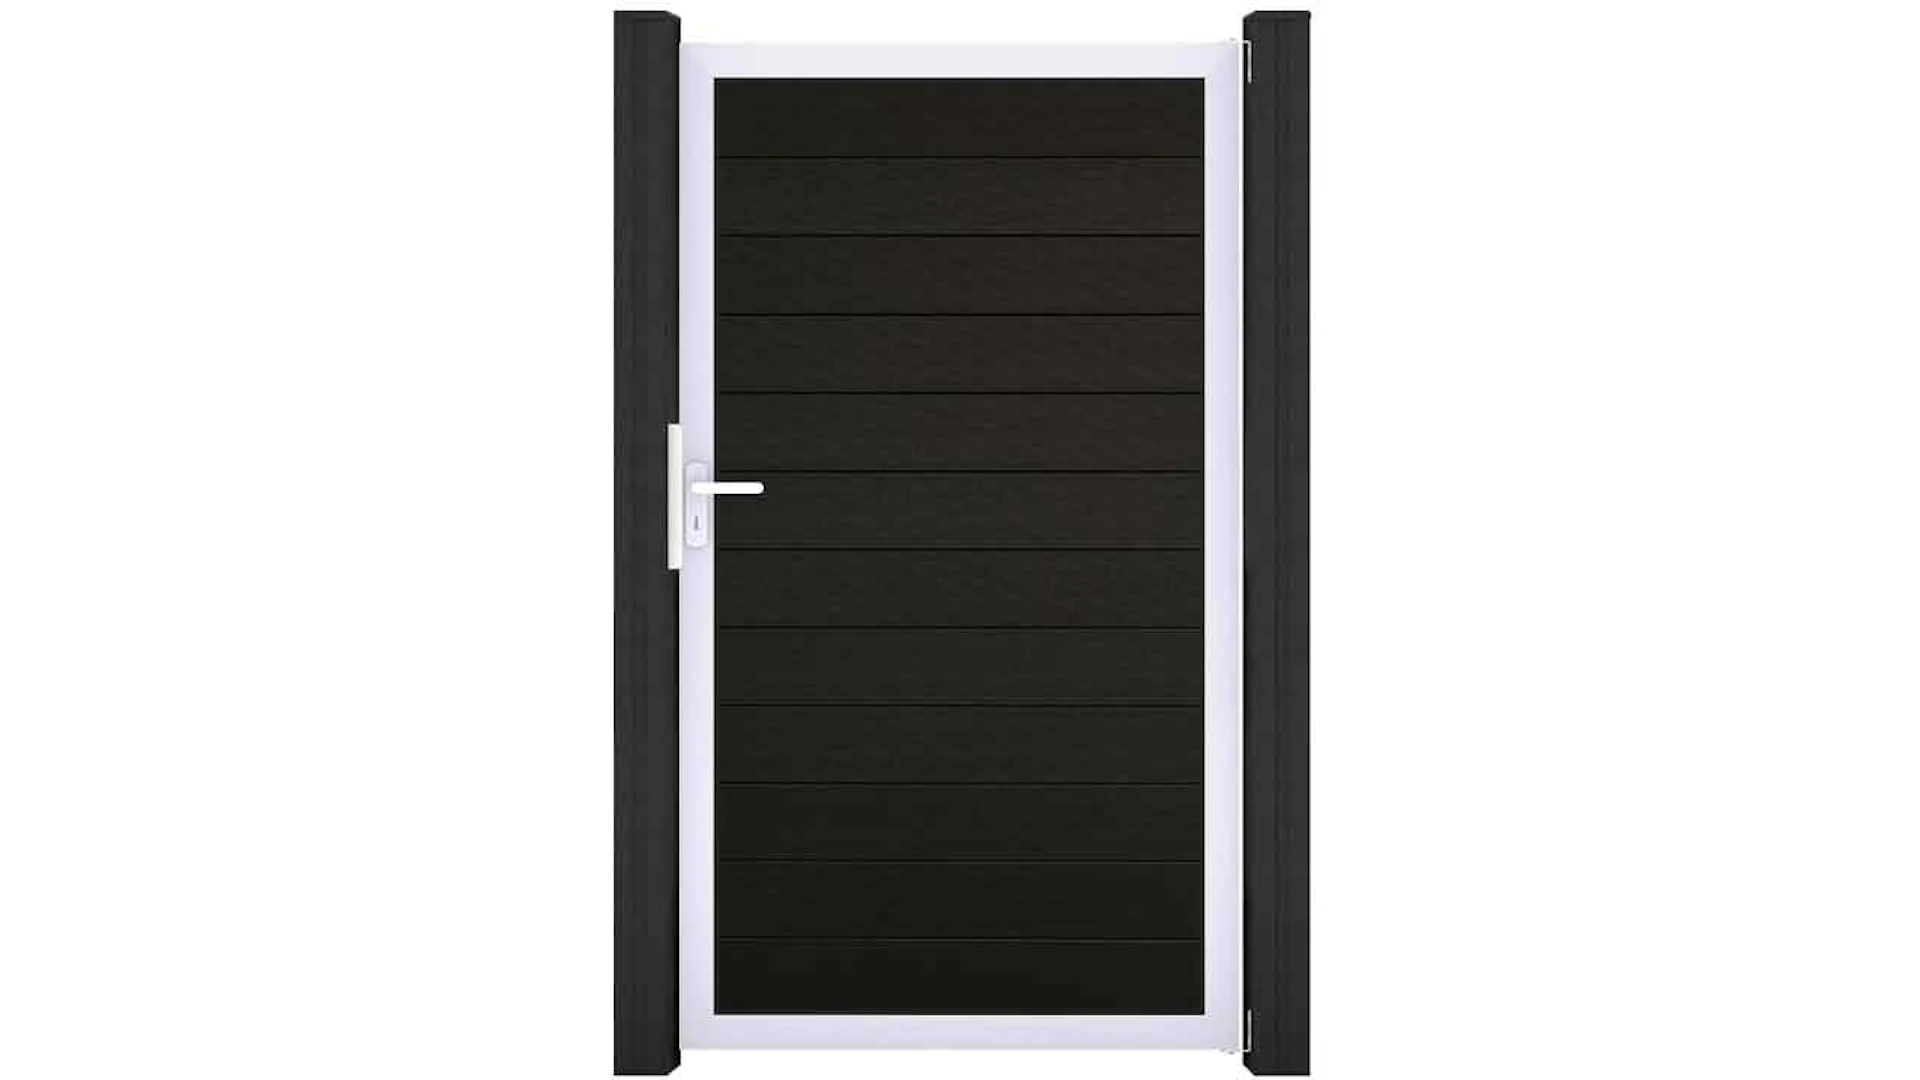 planeo Solid - garden fence universal gate black co-ex with silver aluminium frame 150x180x4cm